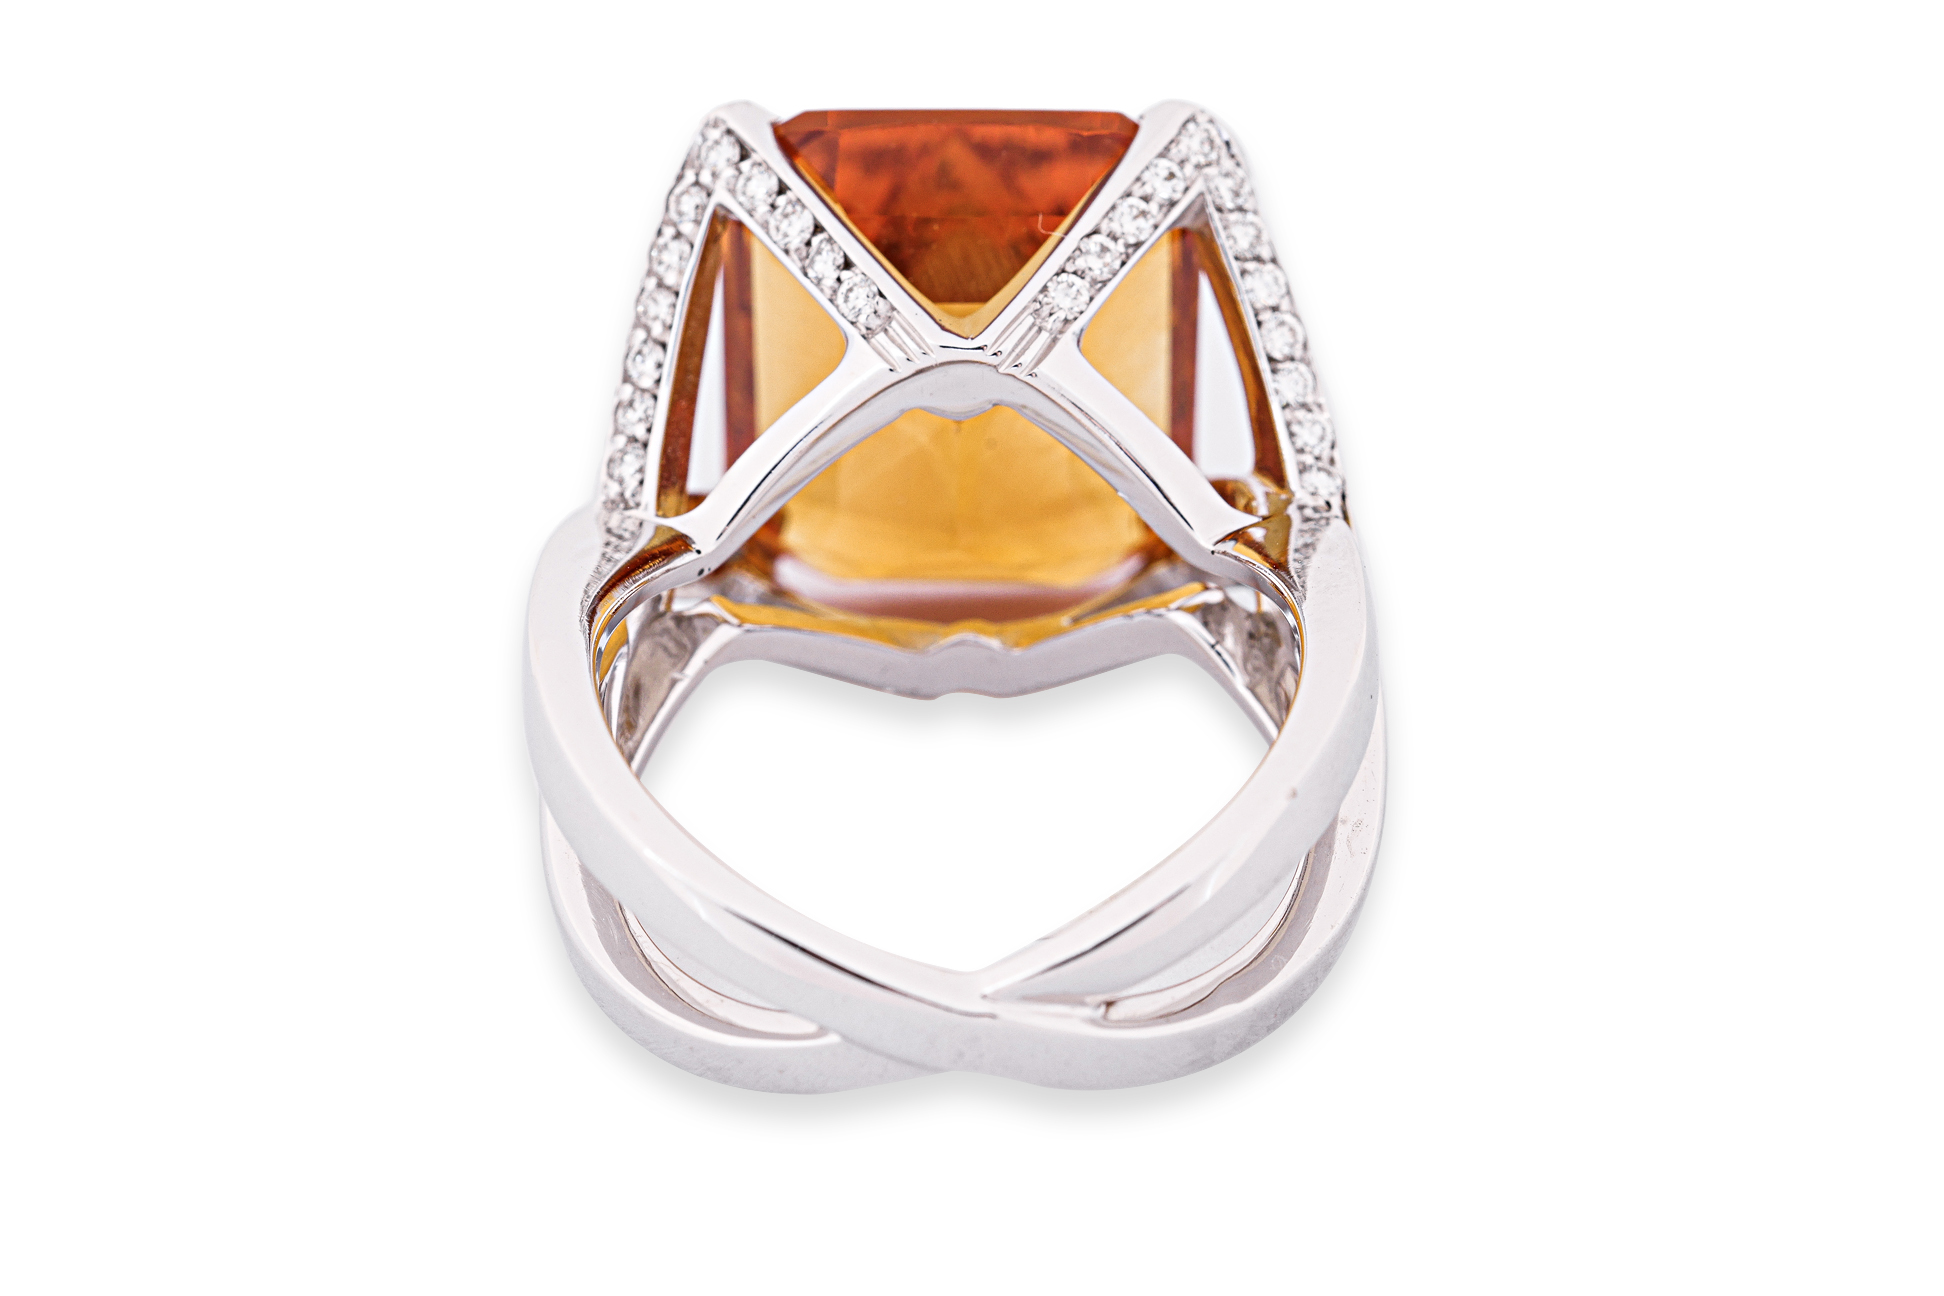 A LARGE CITRINE AND DIAMOND RING - Image 3 of 4